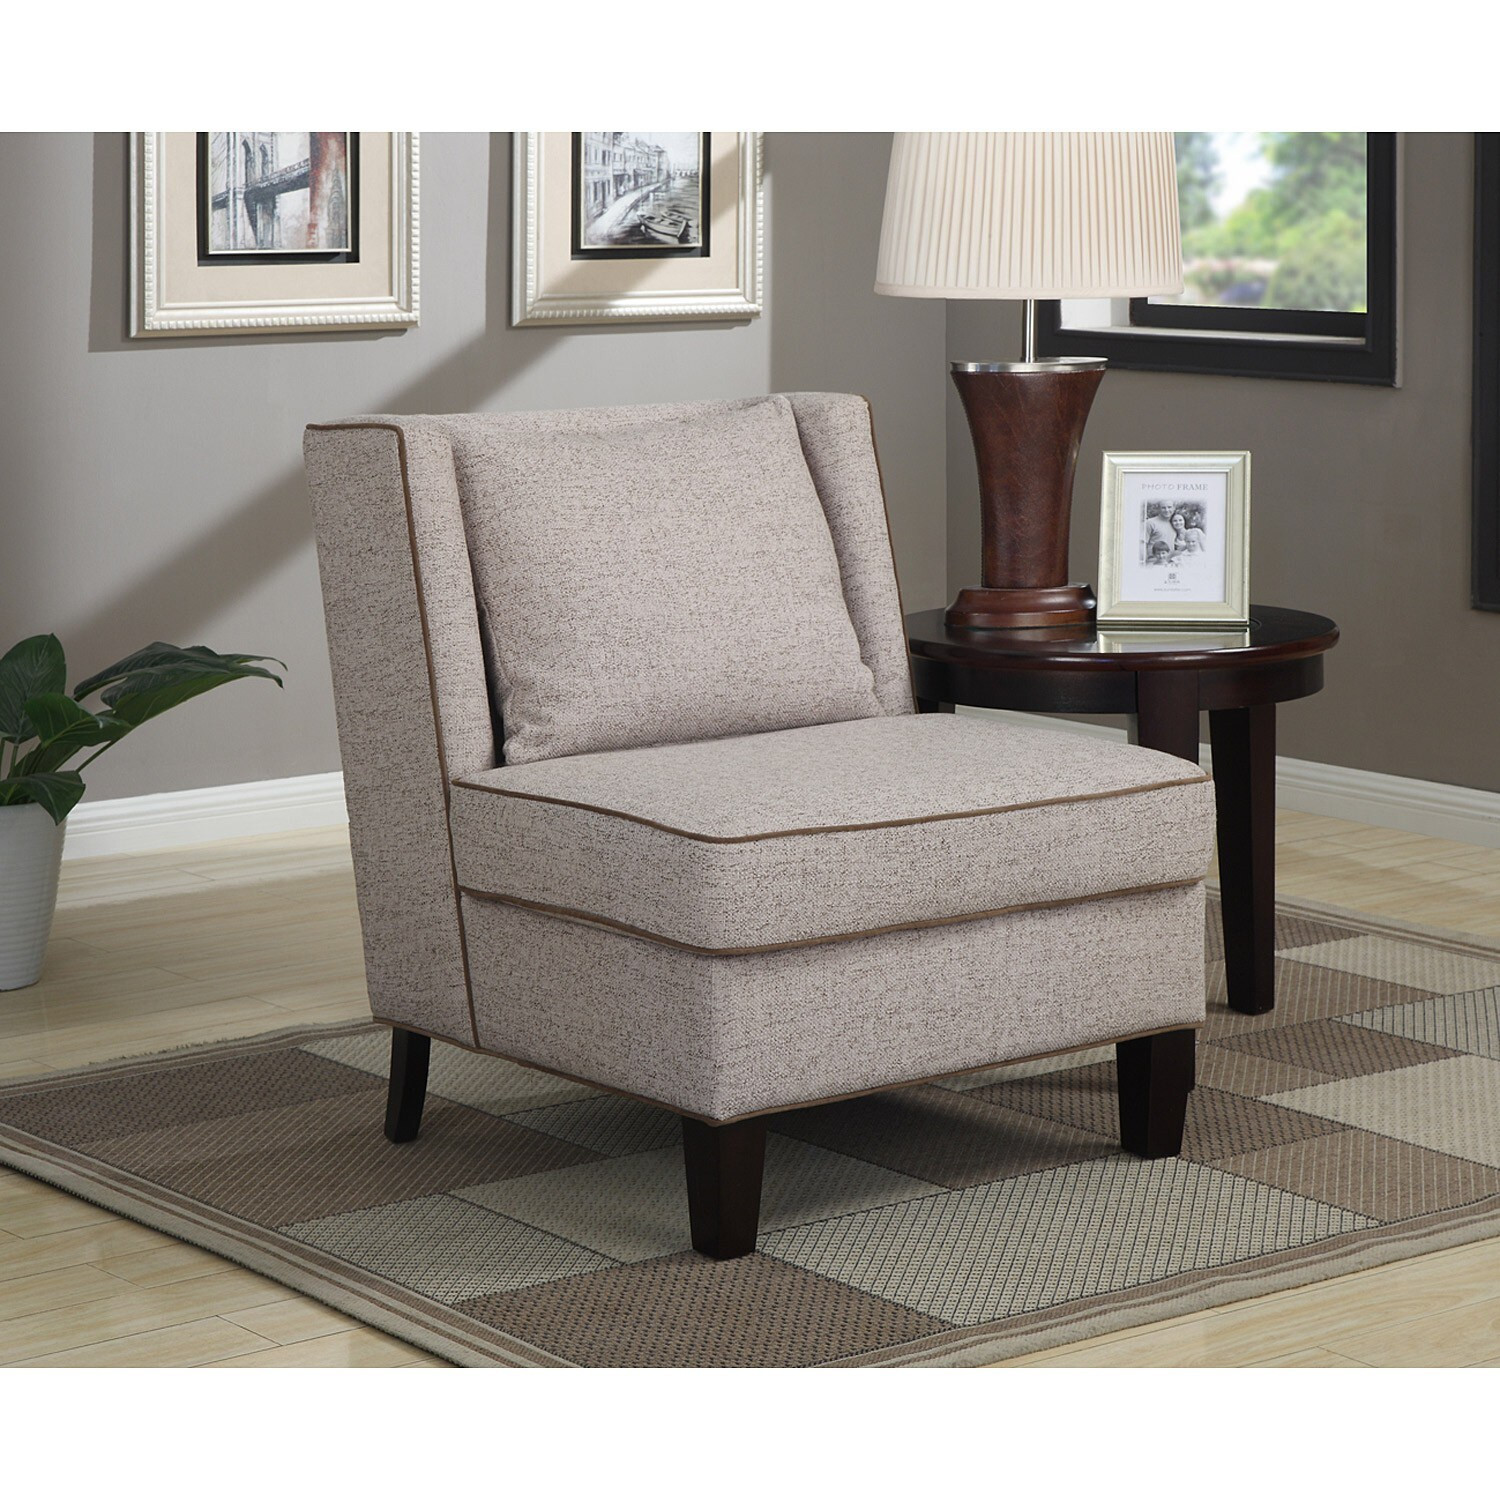 Overstock Living Room Chairs
 Dexter Trinity Stone Armless Chair Overstock™ Shopping